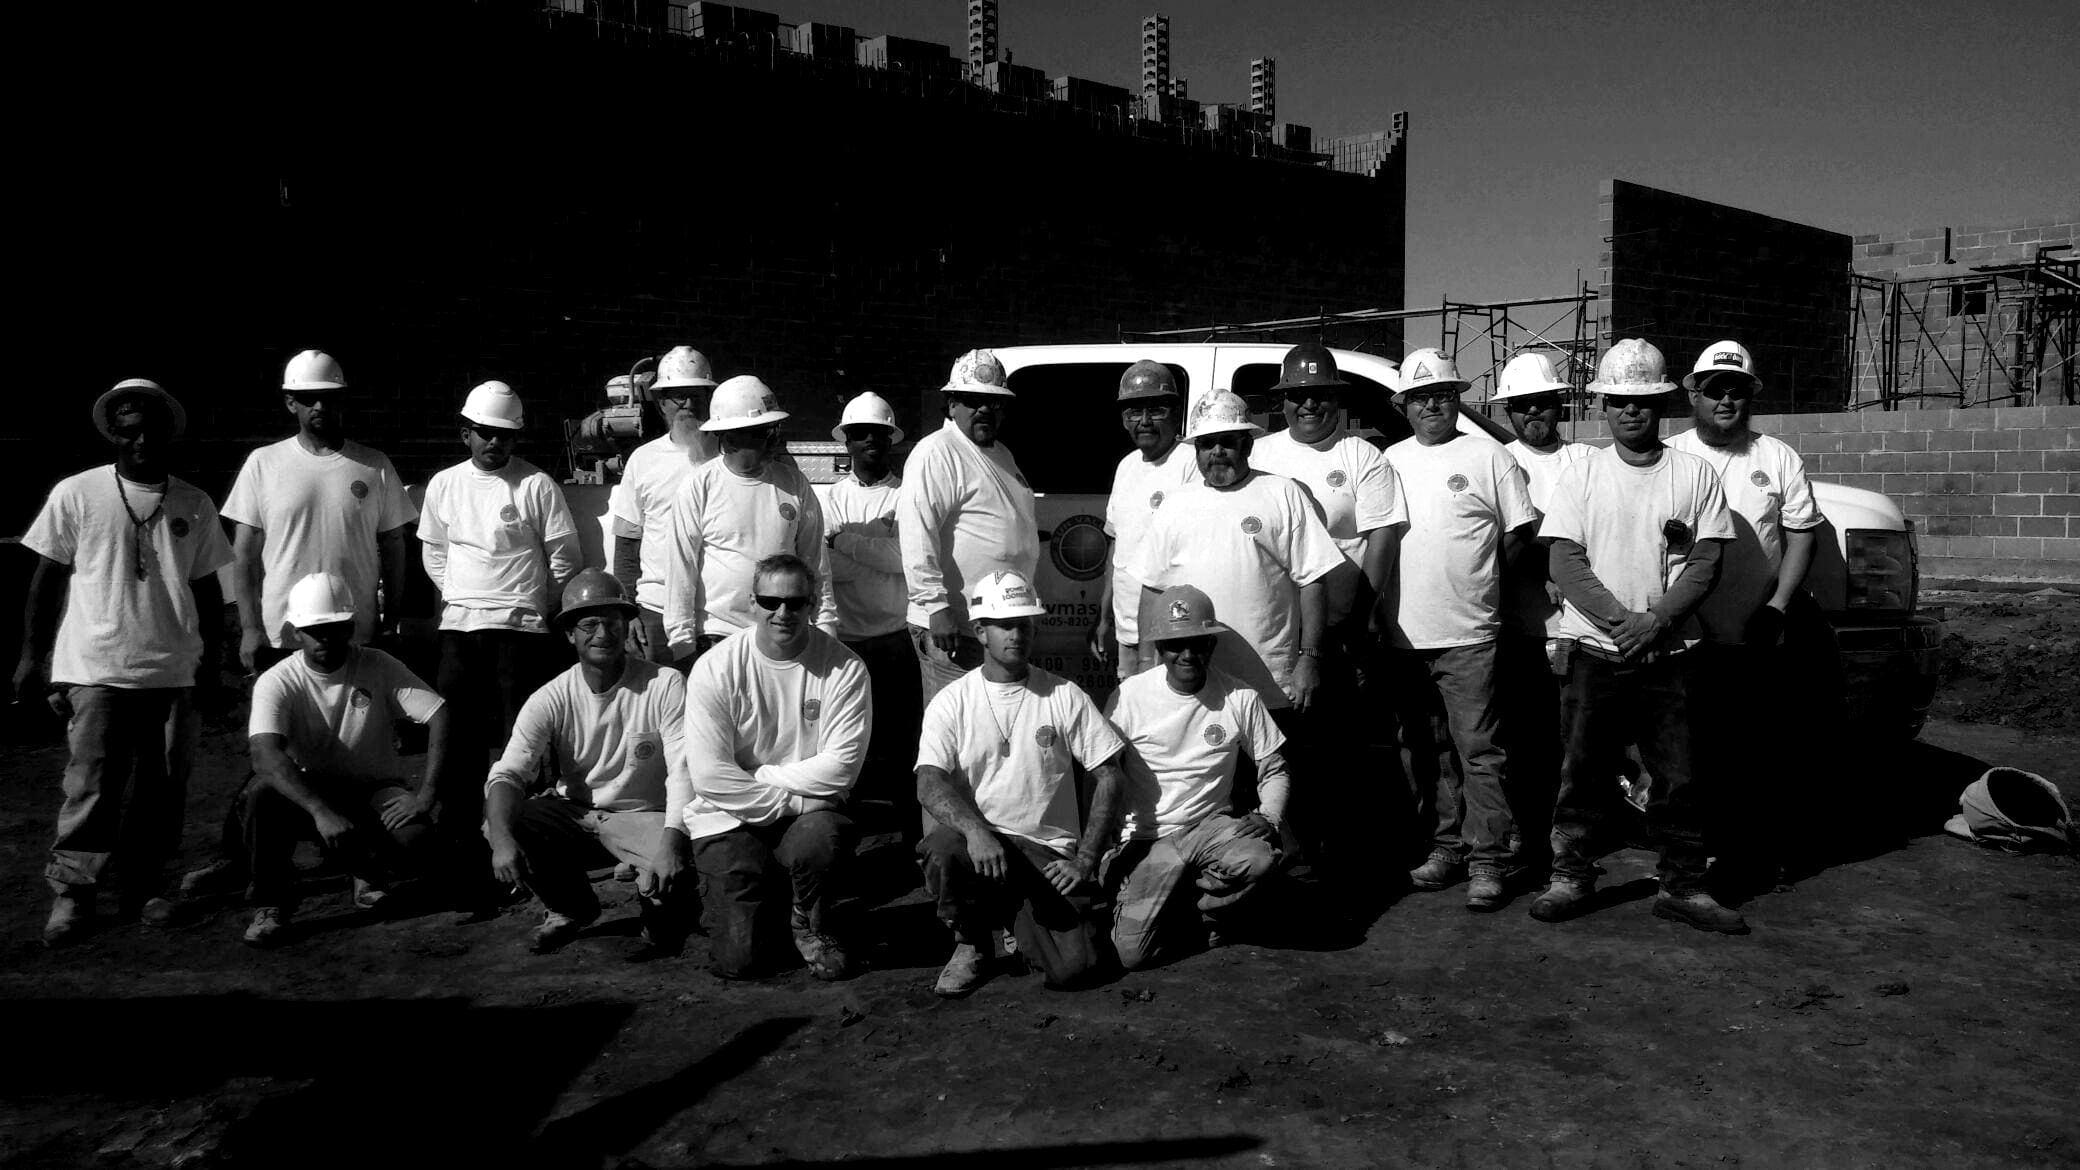 A group of construction workers wearing hard hats from Sun Valley Construction posing for a photo at a construction site.